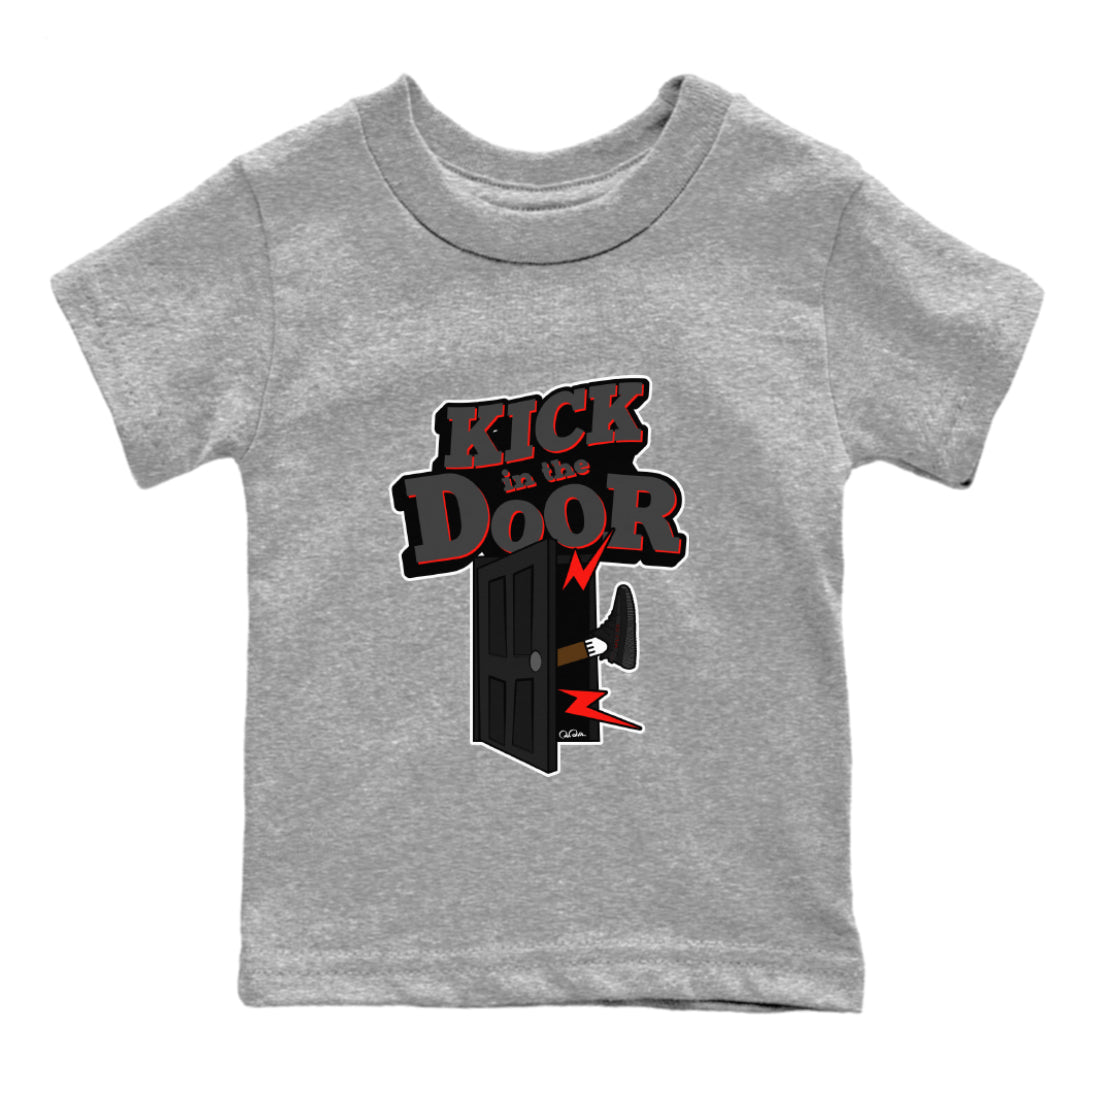 Yeezy 350 Bred shirt to match jordans Kick In The Door sneaker tees Adidas Yeezy Boost V2 350 Bred SNRT Sneaker Release Tees Baby Toddler Heather Grey 2 T-Shirt